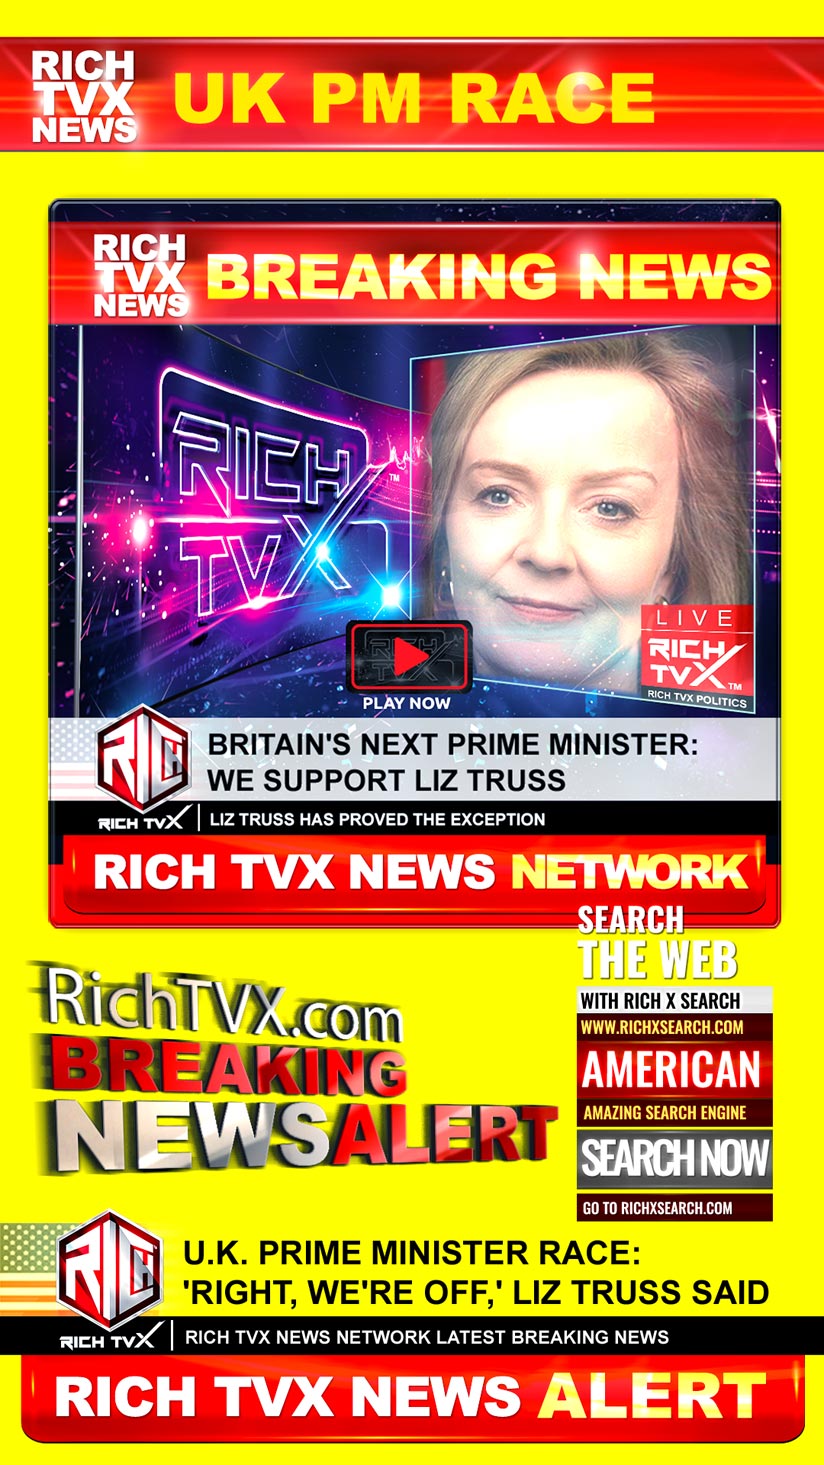 Britain’s Next Prime Minister: The Rich TVX News Network Supports Liz Truss